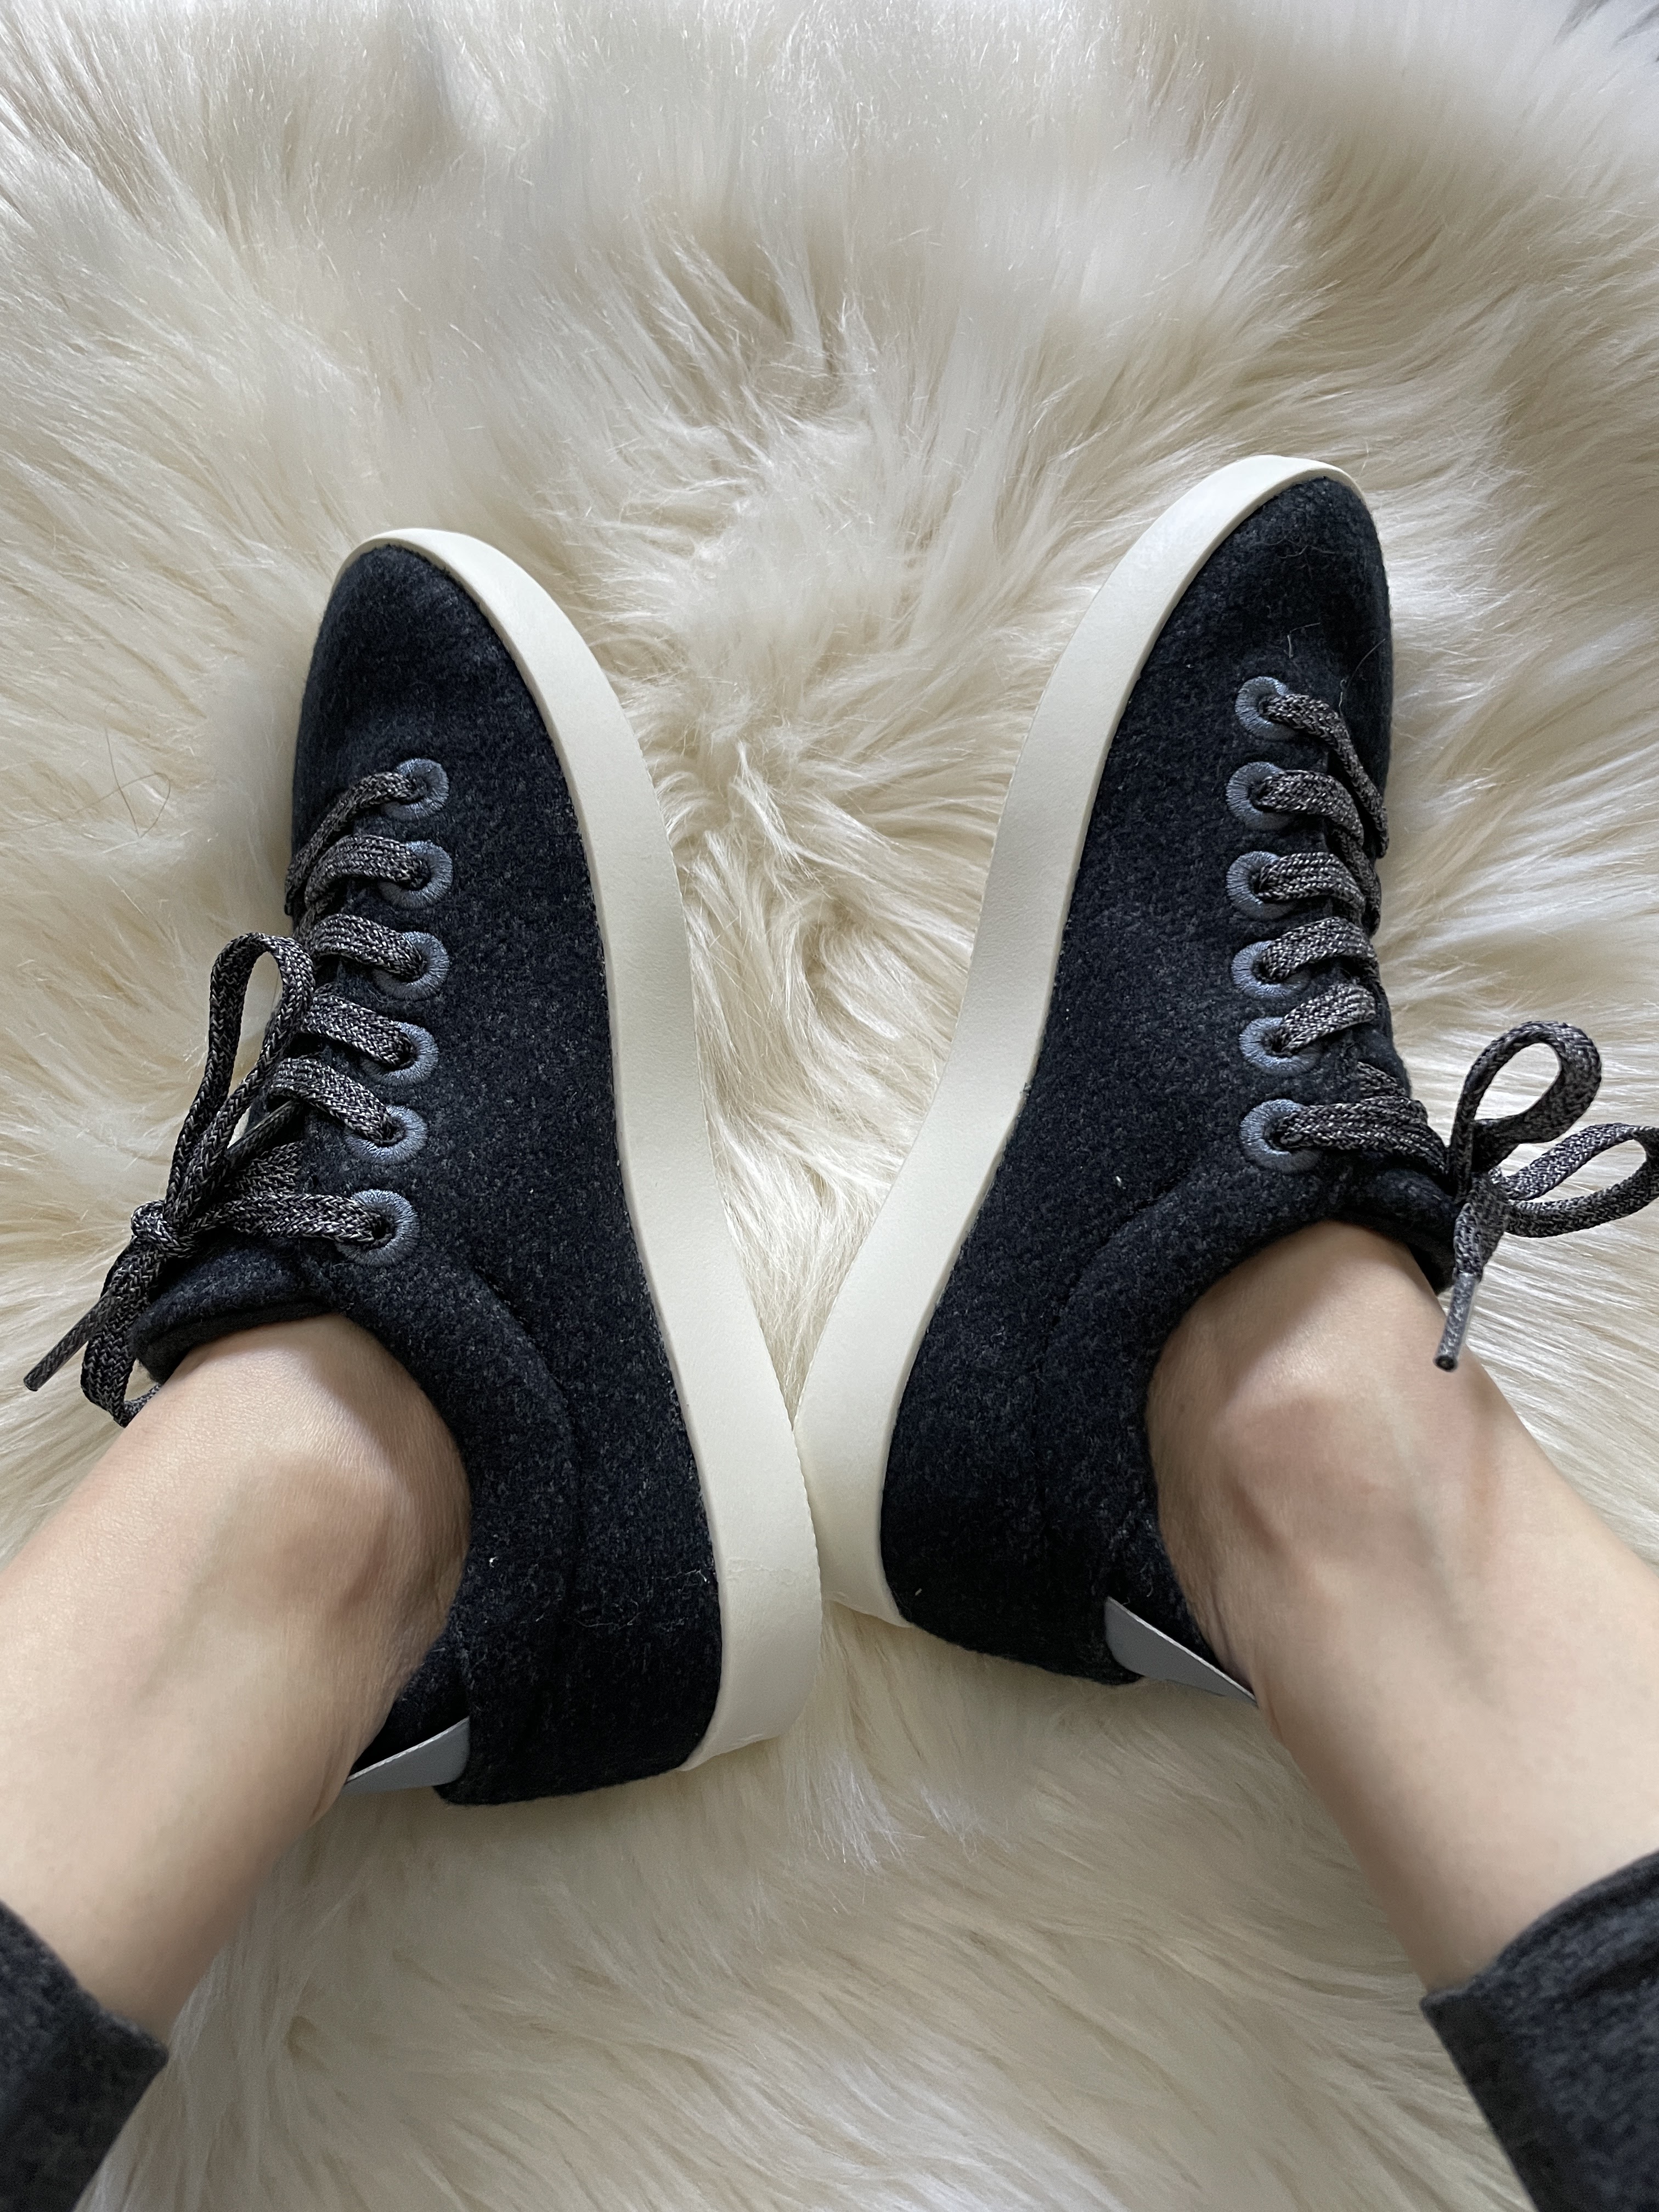 Allbirds Runner Fluffs Review: Limited-Edition Shoes Available Again